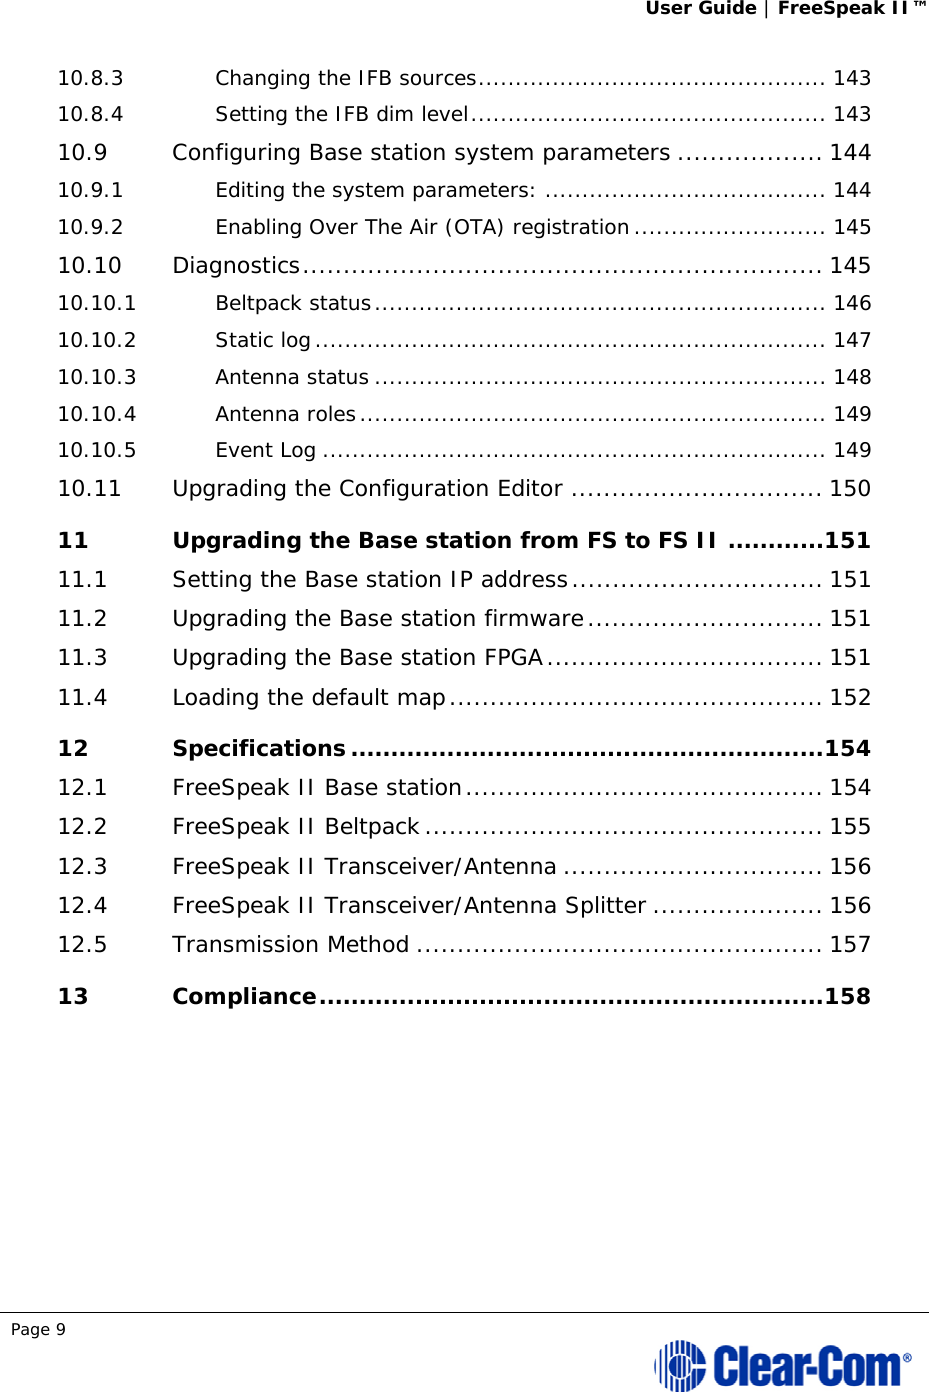 User Guide | FreeSpeak II™  Page 9  10.8.3Changing the IFB sources ............................................... 14310.8.4Setting the IFB dim level ................................................ 14310.9Configuring Base station system parameters .................. 14410.9.1Editing the system parameters: ...................................... 14410.9.2Enabling Over The Air (OTA) registration .......................... 14510.10Diagnostics ................................................................ 14510.10.1Beltpack status ............................................................. 14610.10.2Static log ..................................................................... 14710.10.3Antenna status ............................................................. 14810.10.4Antenna roles ............................................................... 14910.10.5Event Log .................................................................... 14910.11Upgrading the Configuration Editor ............................... 15011Upgrading the Base station from FS to FS II ............ 15111.1Setting the Base station IP address ............................... 15111.2Upgrading the Base station firmware ............................. 15111.3Upgrading the Base station FPGA .................................. 15111.4Loading the default map .............................................. 15212Specifications ........................................................... 15412.1FreeSpeak II Base station ............................................ 15412.2FreeSpeak II Beltpack ................................................. 15512.3FreeSpeak II Transceiver/Antenna ................................ 15612.4FreeSpeak II Transceiver/Antenna Splitter ..................... 15612.5Transmission Method .................................................. 15713Compliance ............................................................... 158 